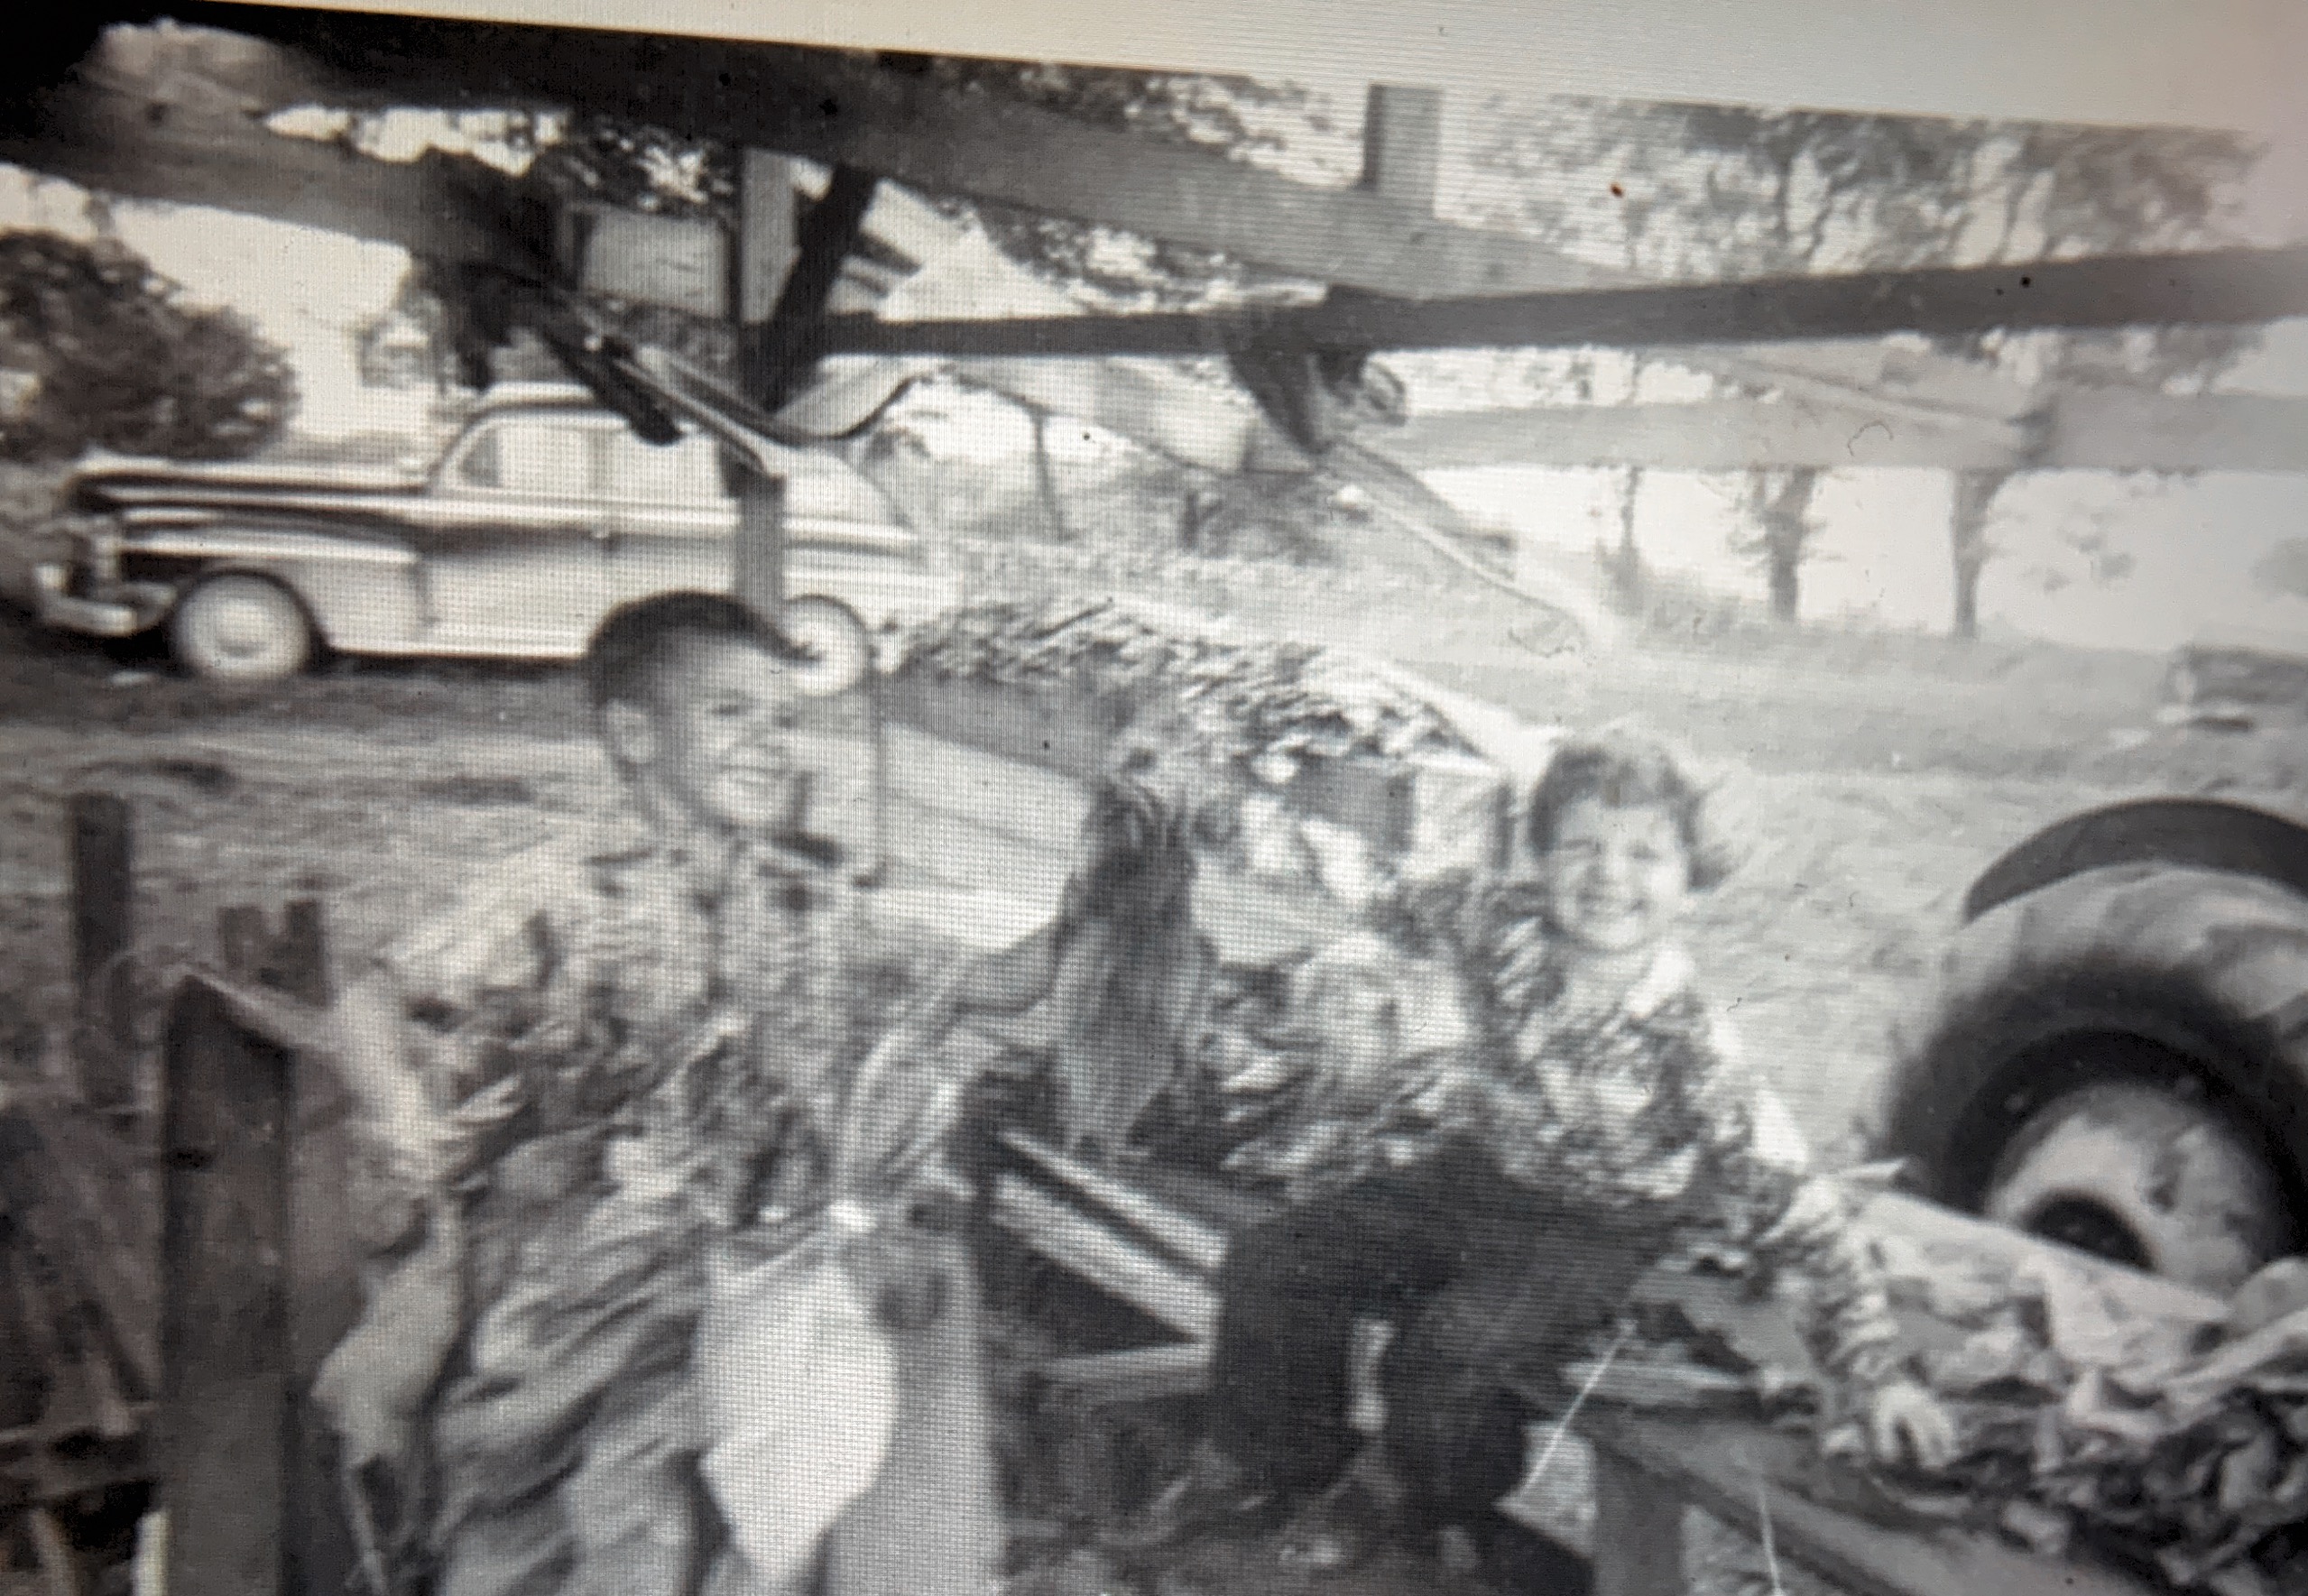 My brother Eric and Myself helping on our parents Tobacco Farm. Getting Tobacco leaves ready to be cured. We had great times growing up on the farm in the mid 1950s.